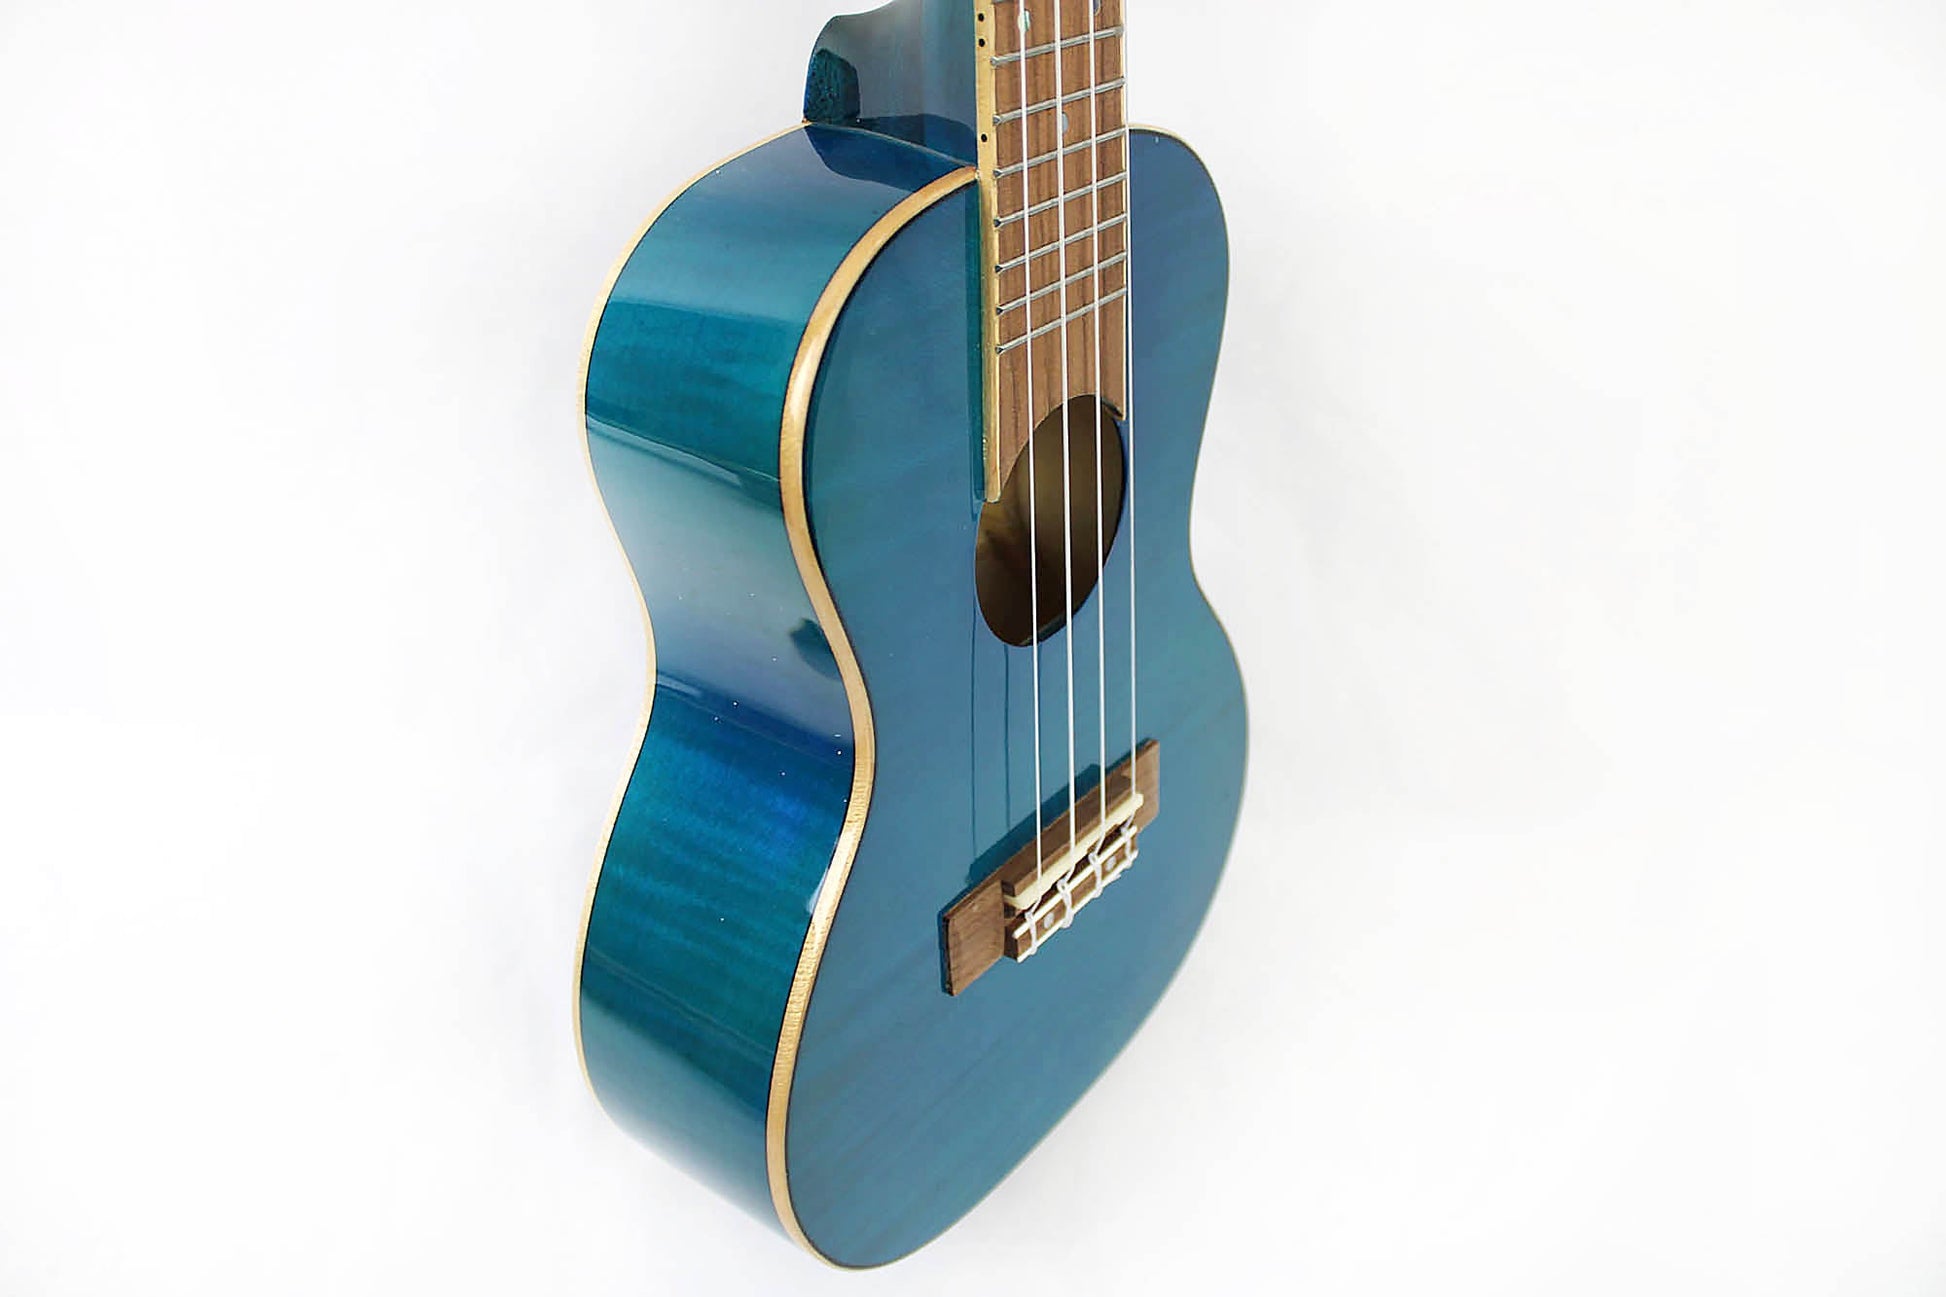 This is the front side view  of the top and neck of an Amahi PGUK555BLC Flamed Maple Concert Ukulele- blue.